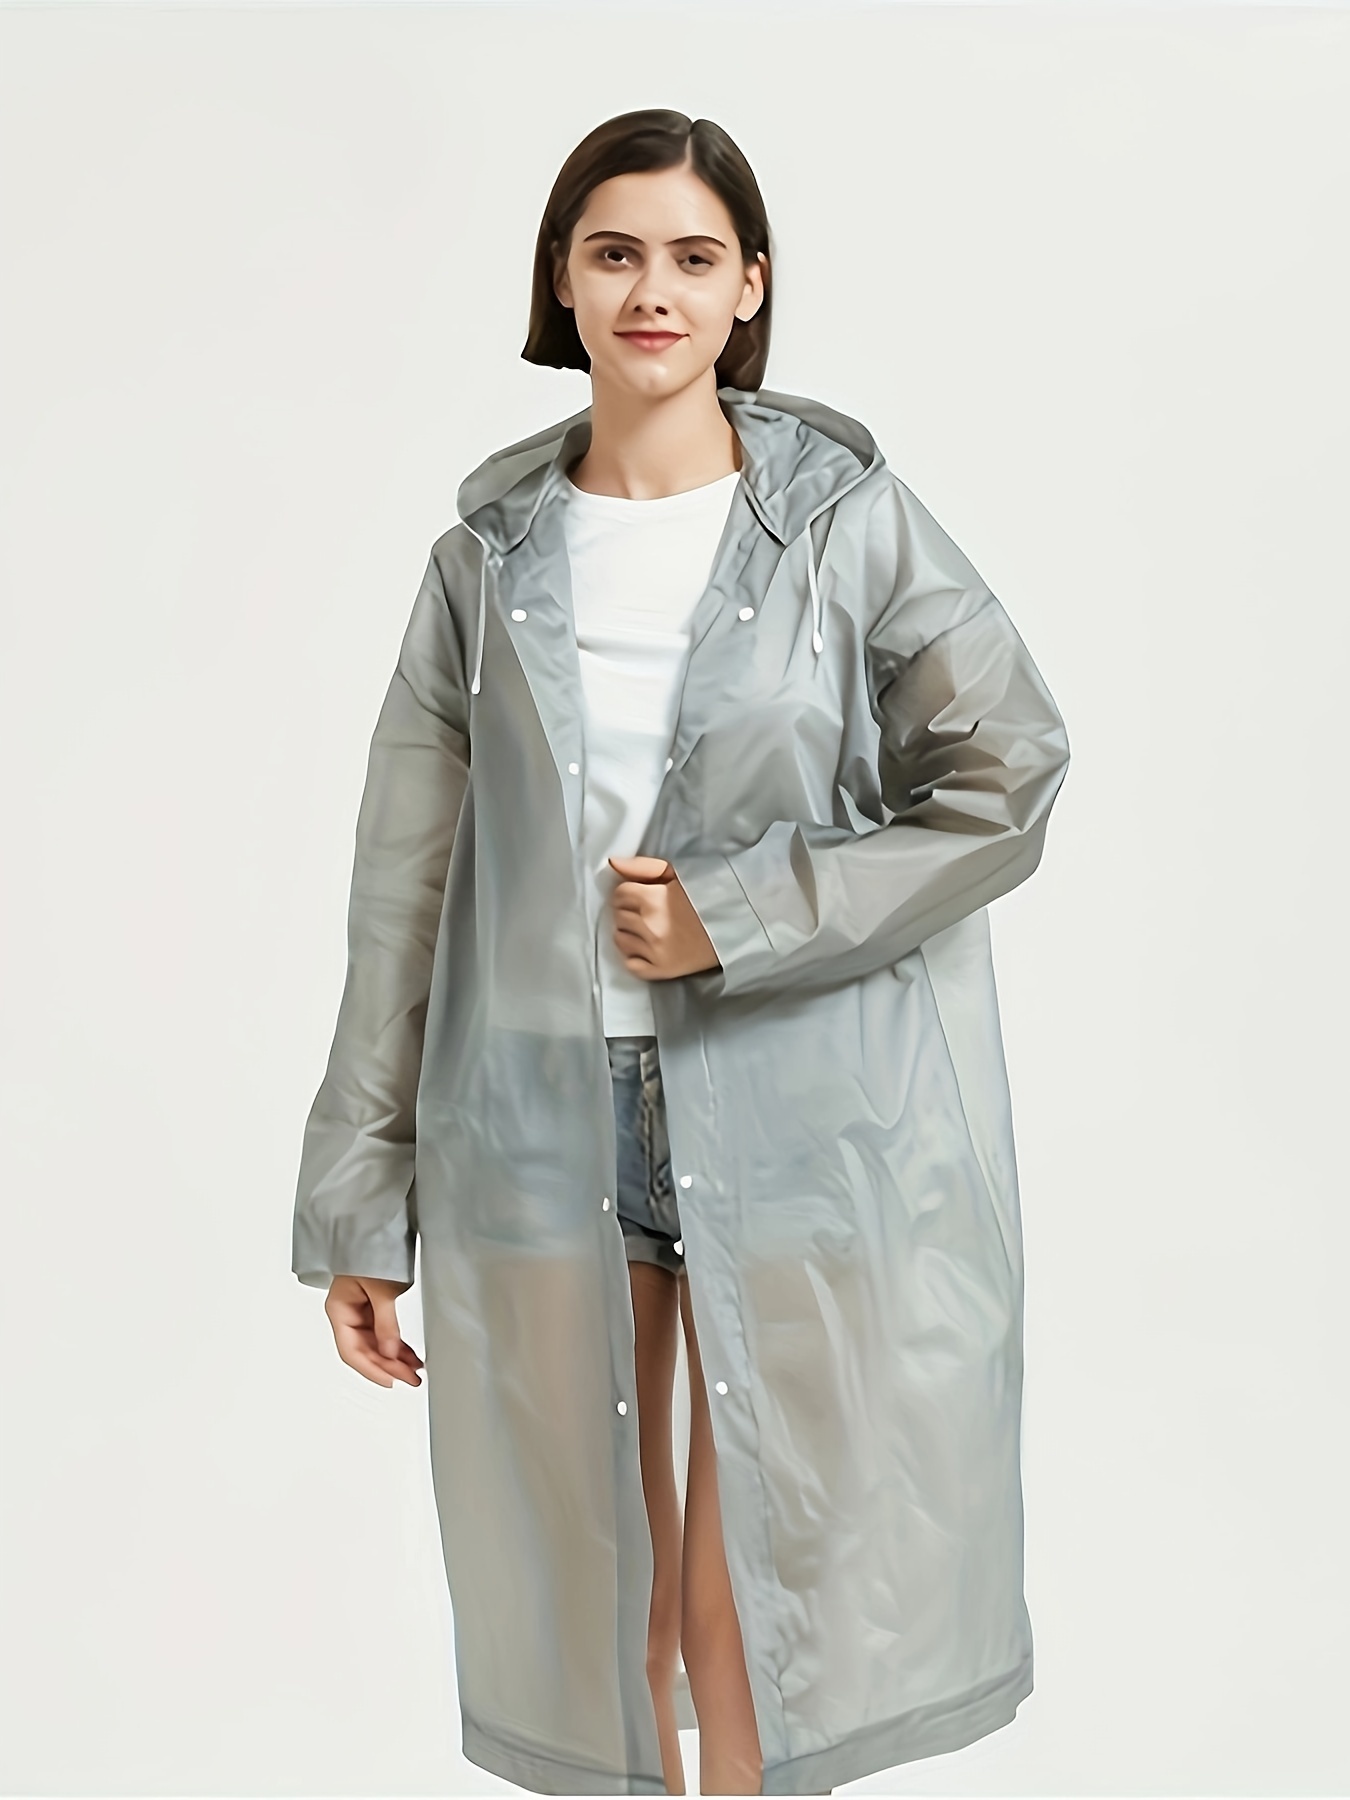 fashionable and lightweight reusable raincoat travel poncho for women thickened eva material provides ultimate protection from rain and wind ideal for outdoor activities details 8